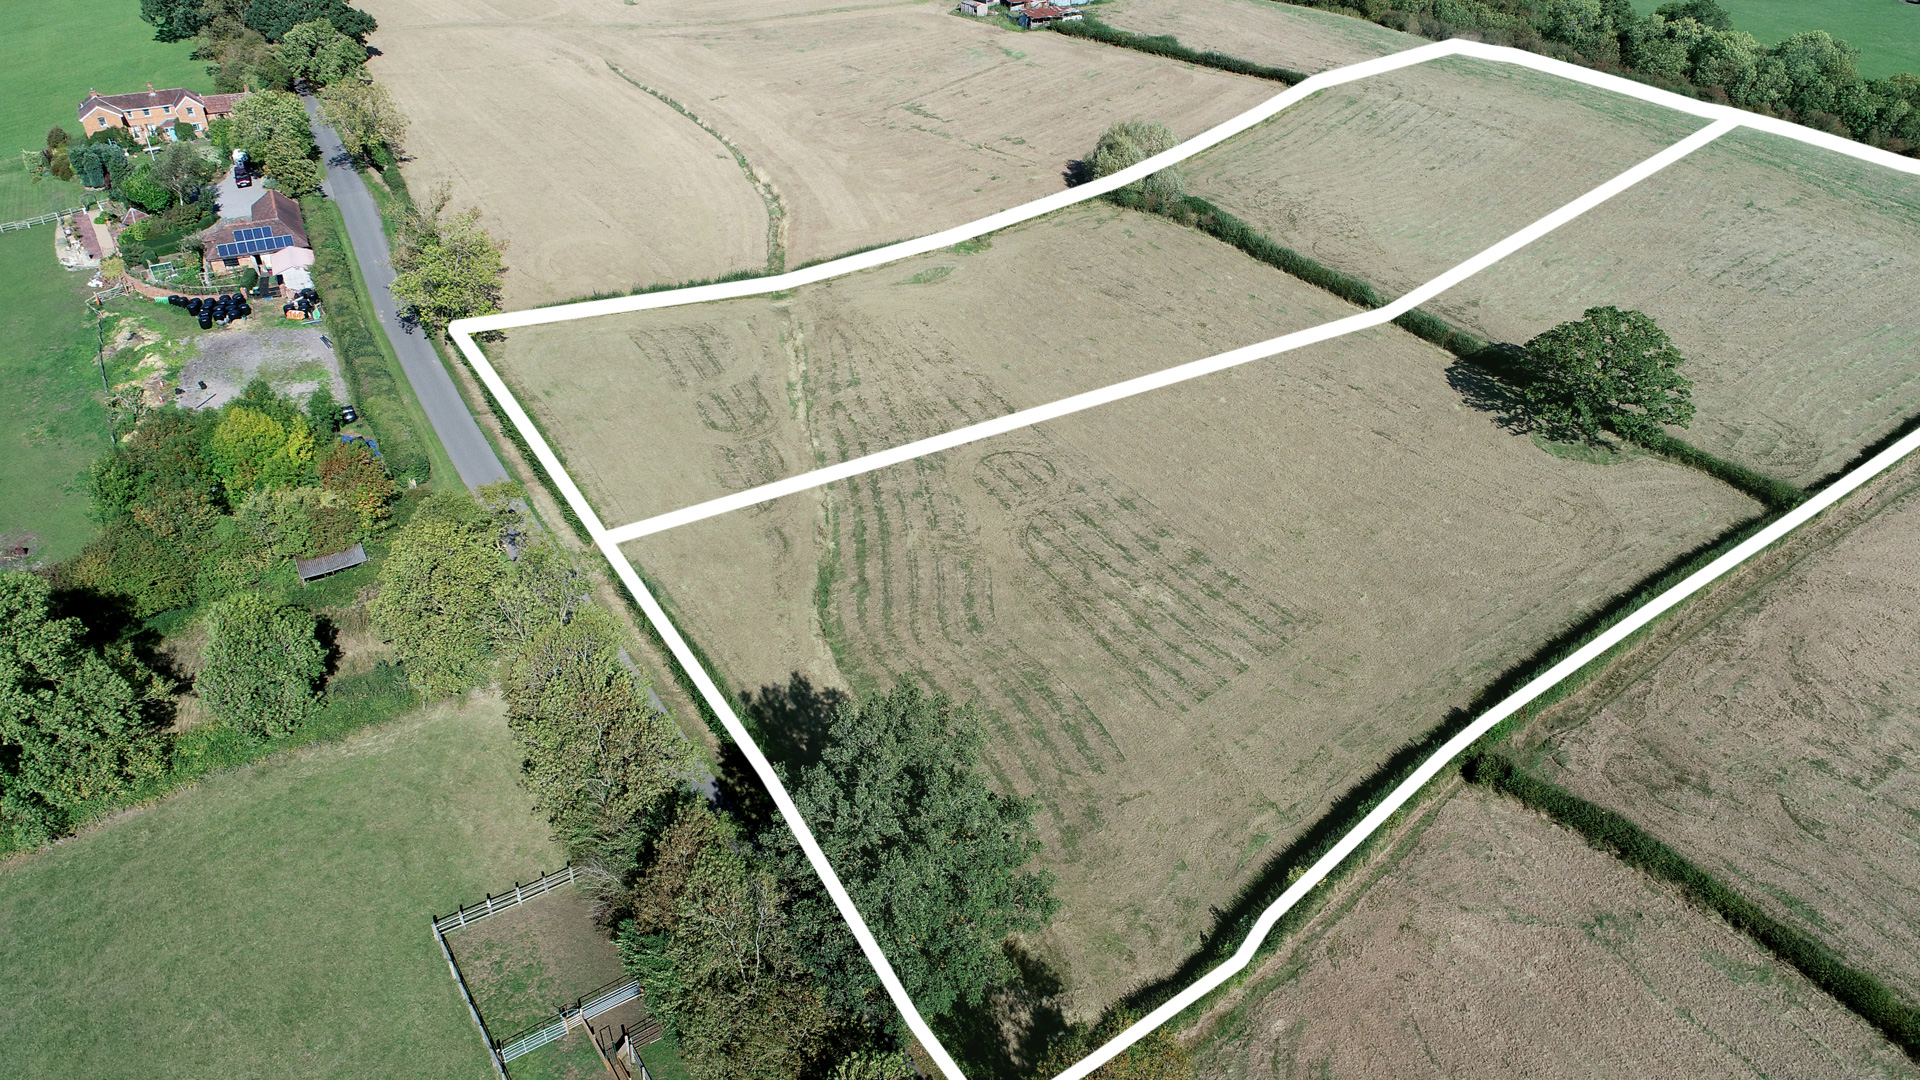 Land for sale at Berrowhill View in Feckenham, Redditch aerial view